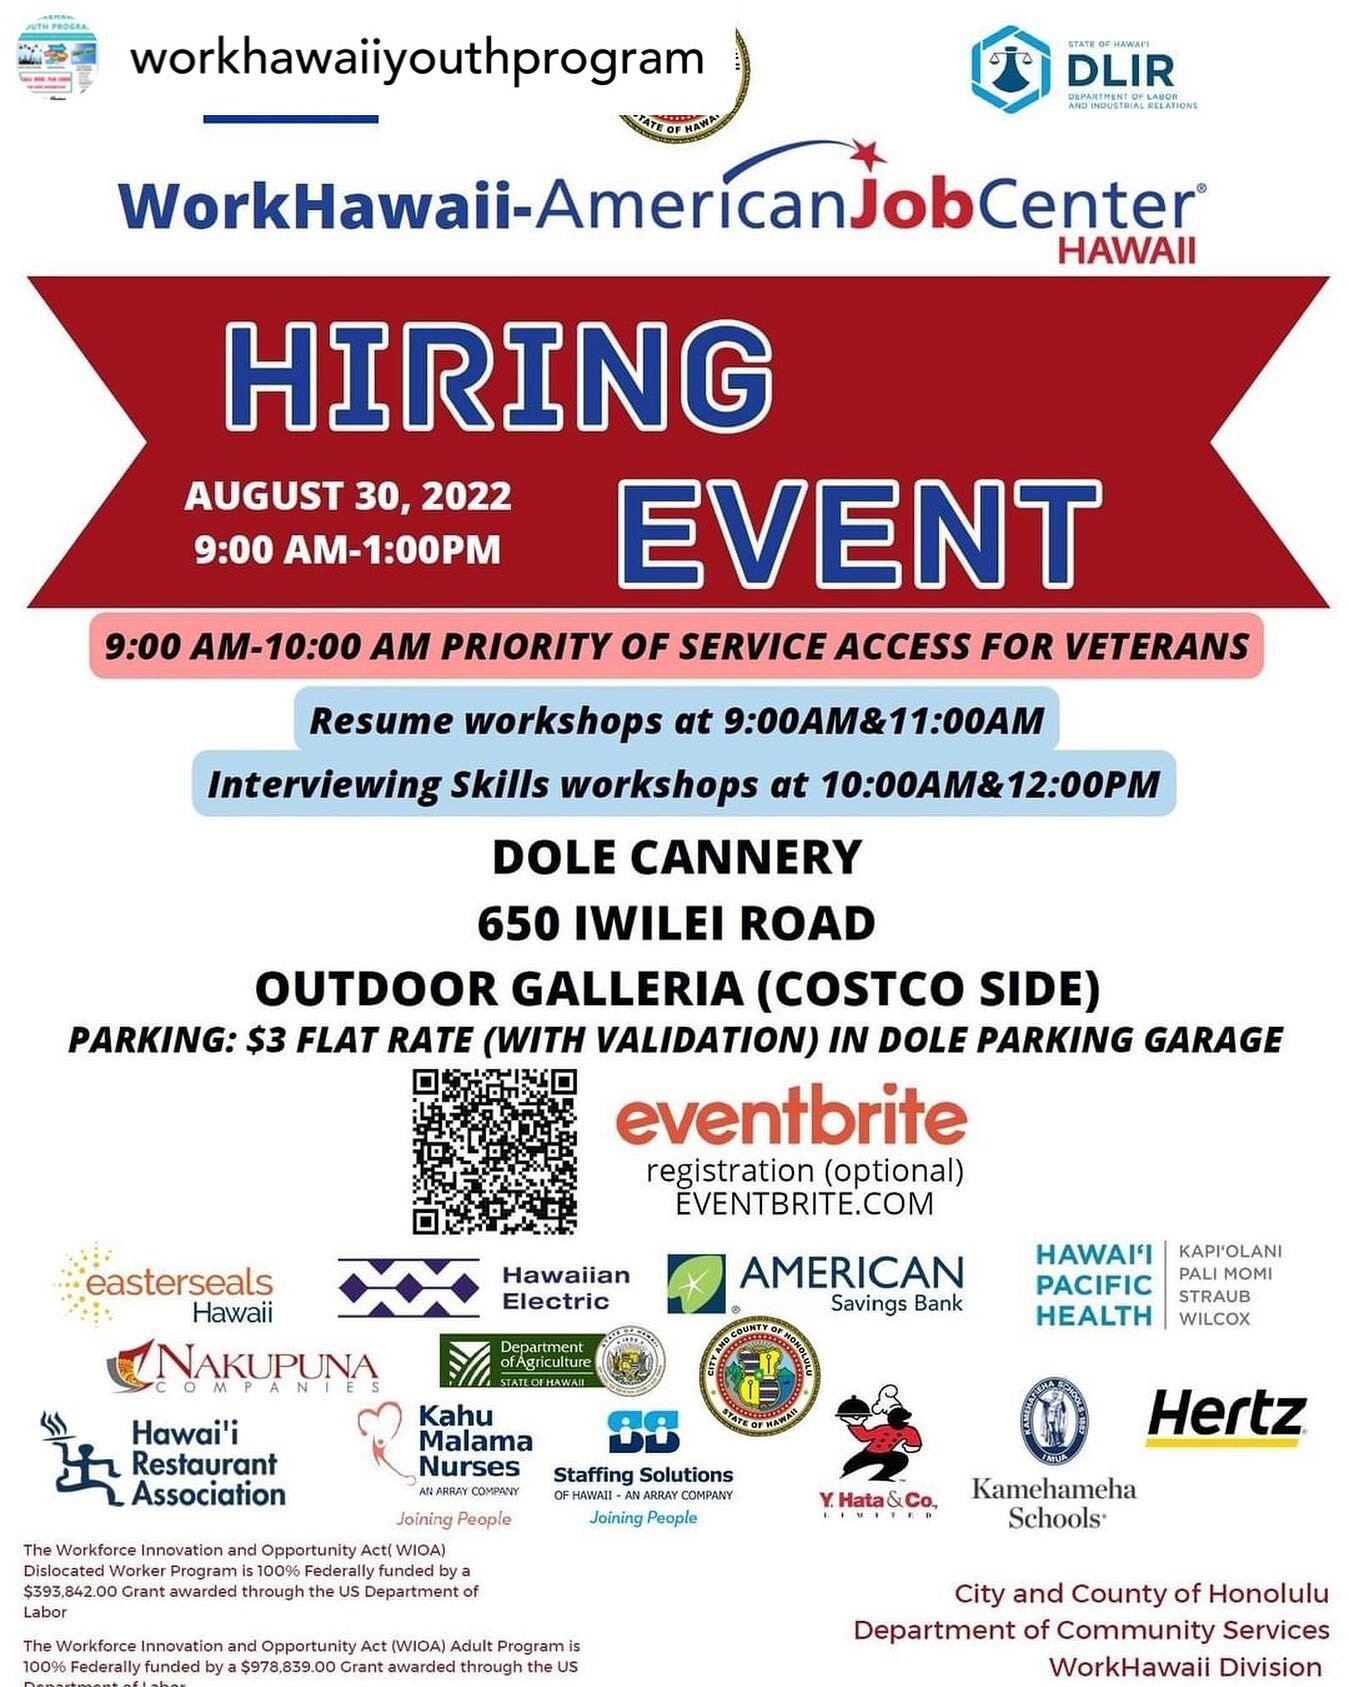 Join the Work Hawaii-American Job Center for a Hiring Event on Tuesday, August 30 from 9am to 1pm!